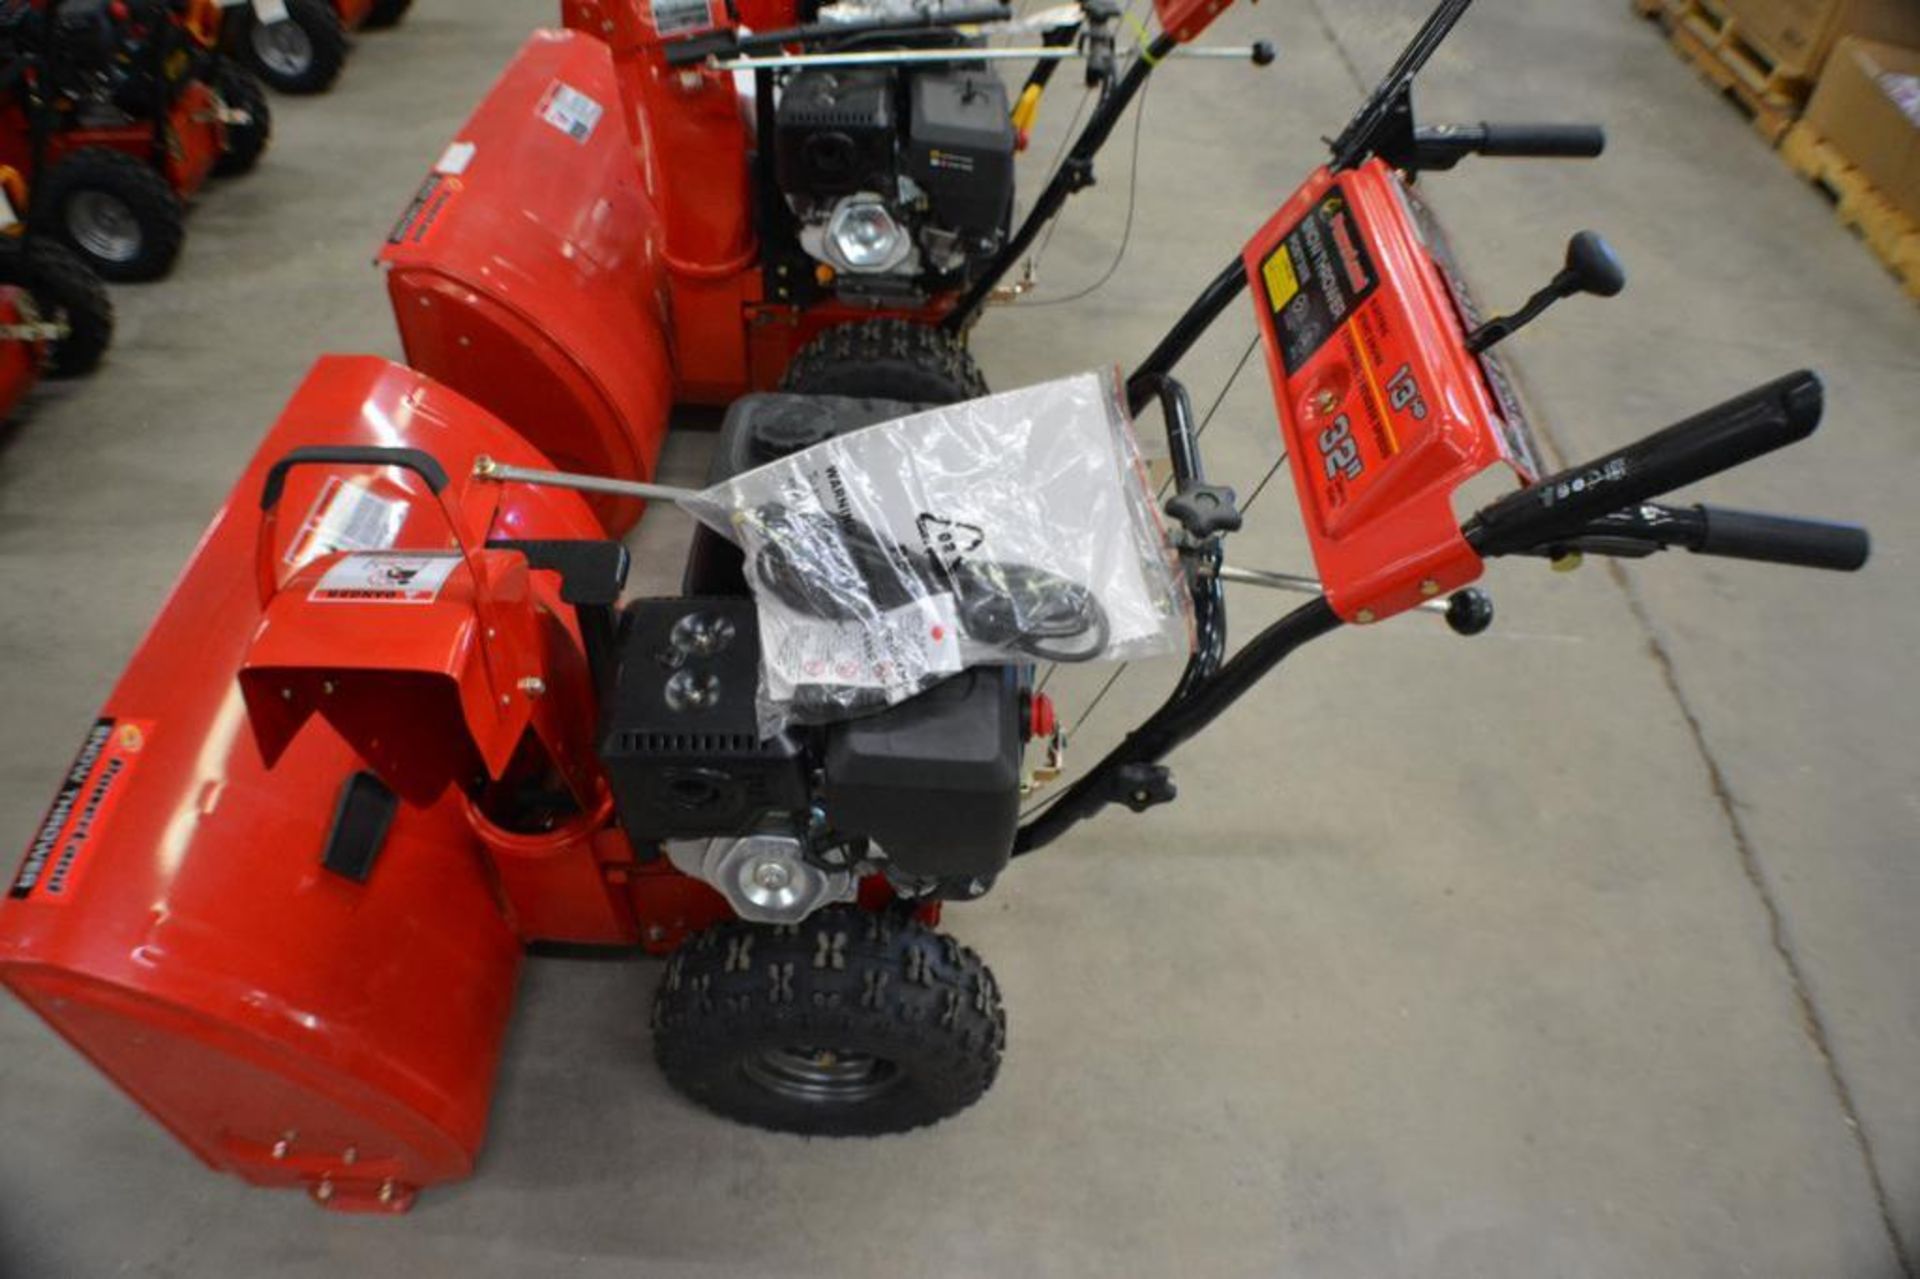 Snow Thrower 32in. 13HP with electric Start Engine 4 Stroke by Powerland - Image 8 of 8